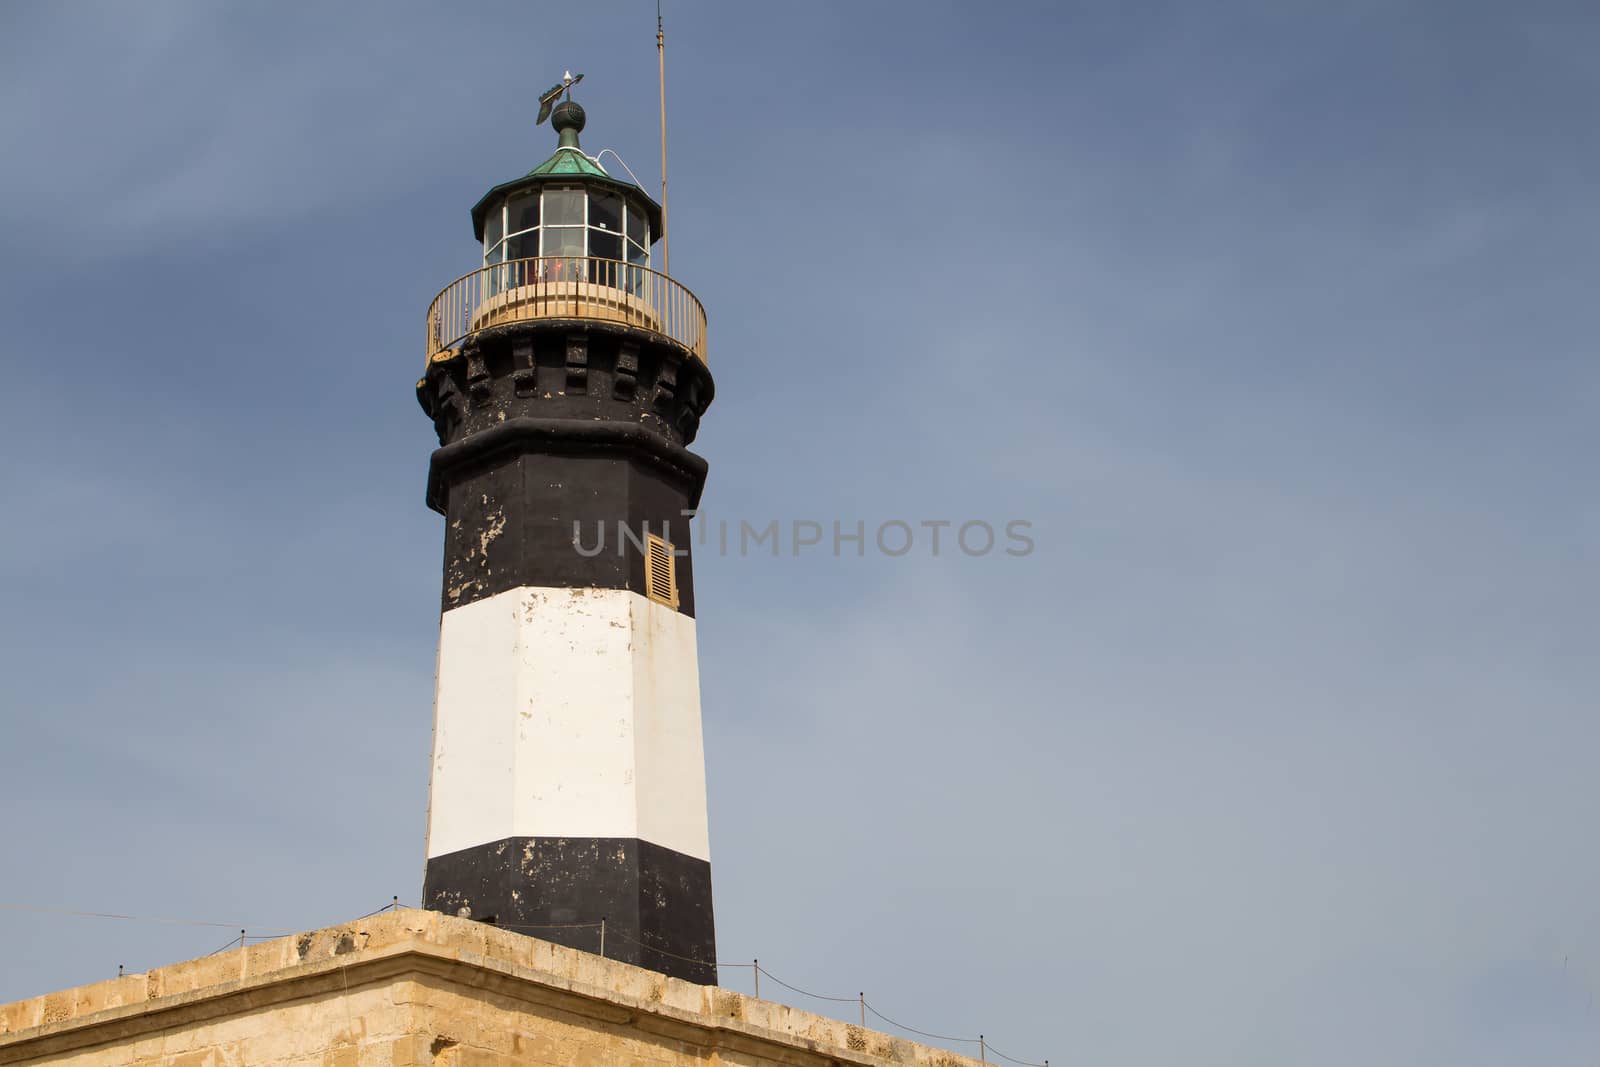 Black and white tower of the lighthouse at the island Malta, Delimara point in the south-east part of the island. Cloudy sky in the background.